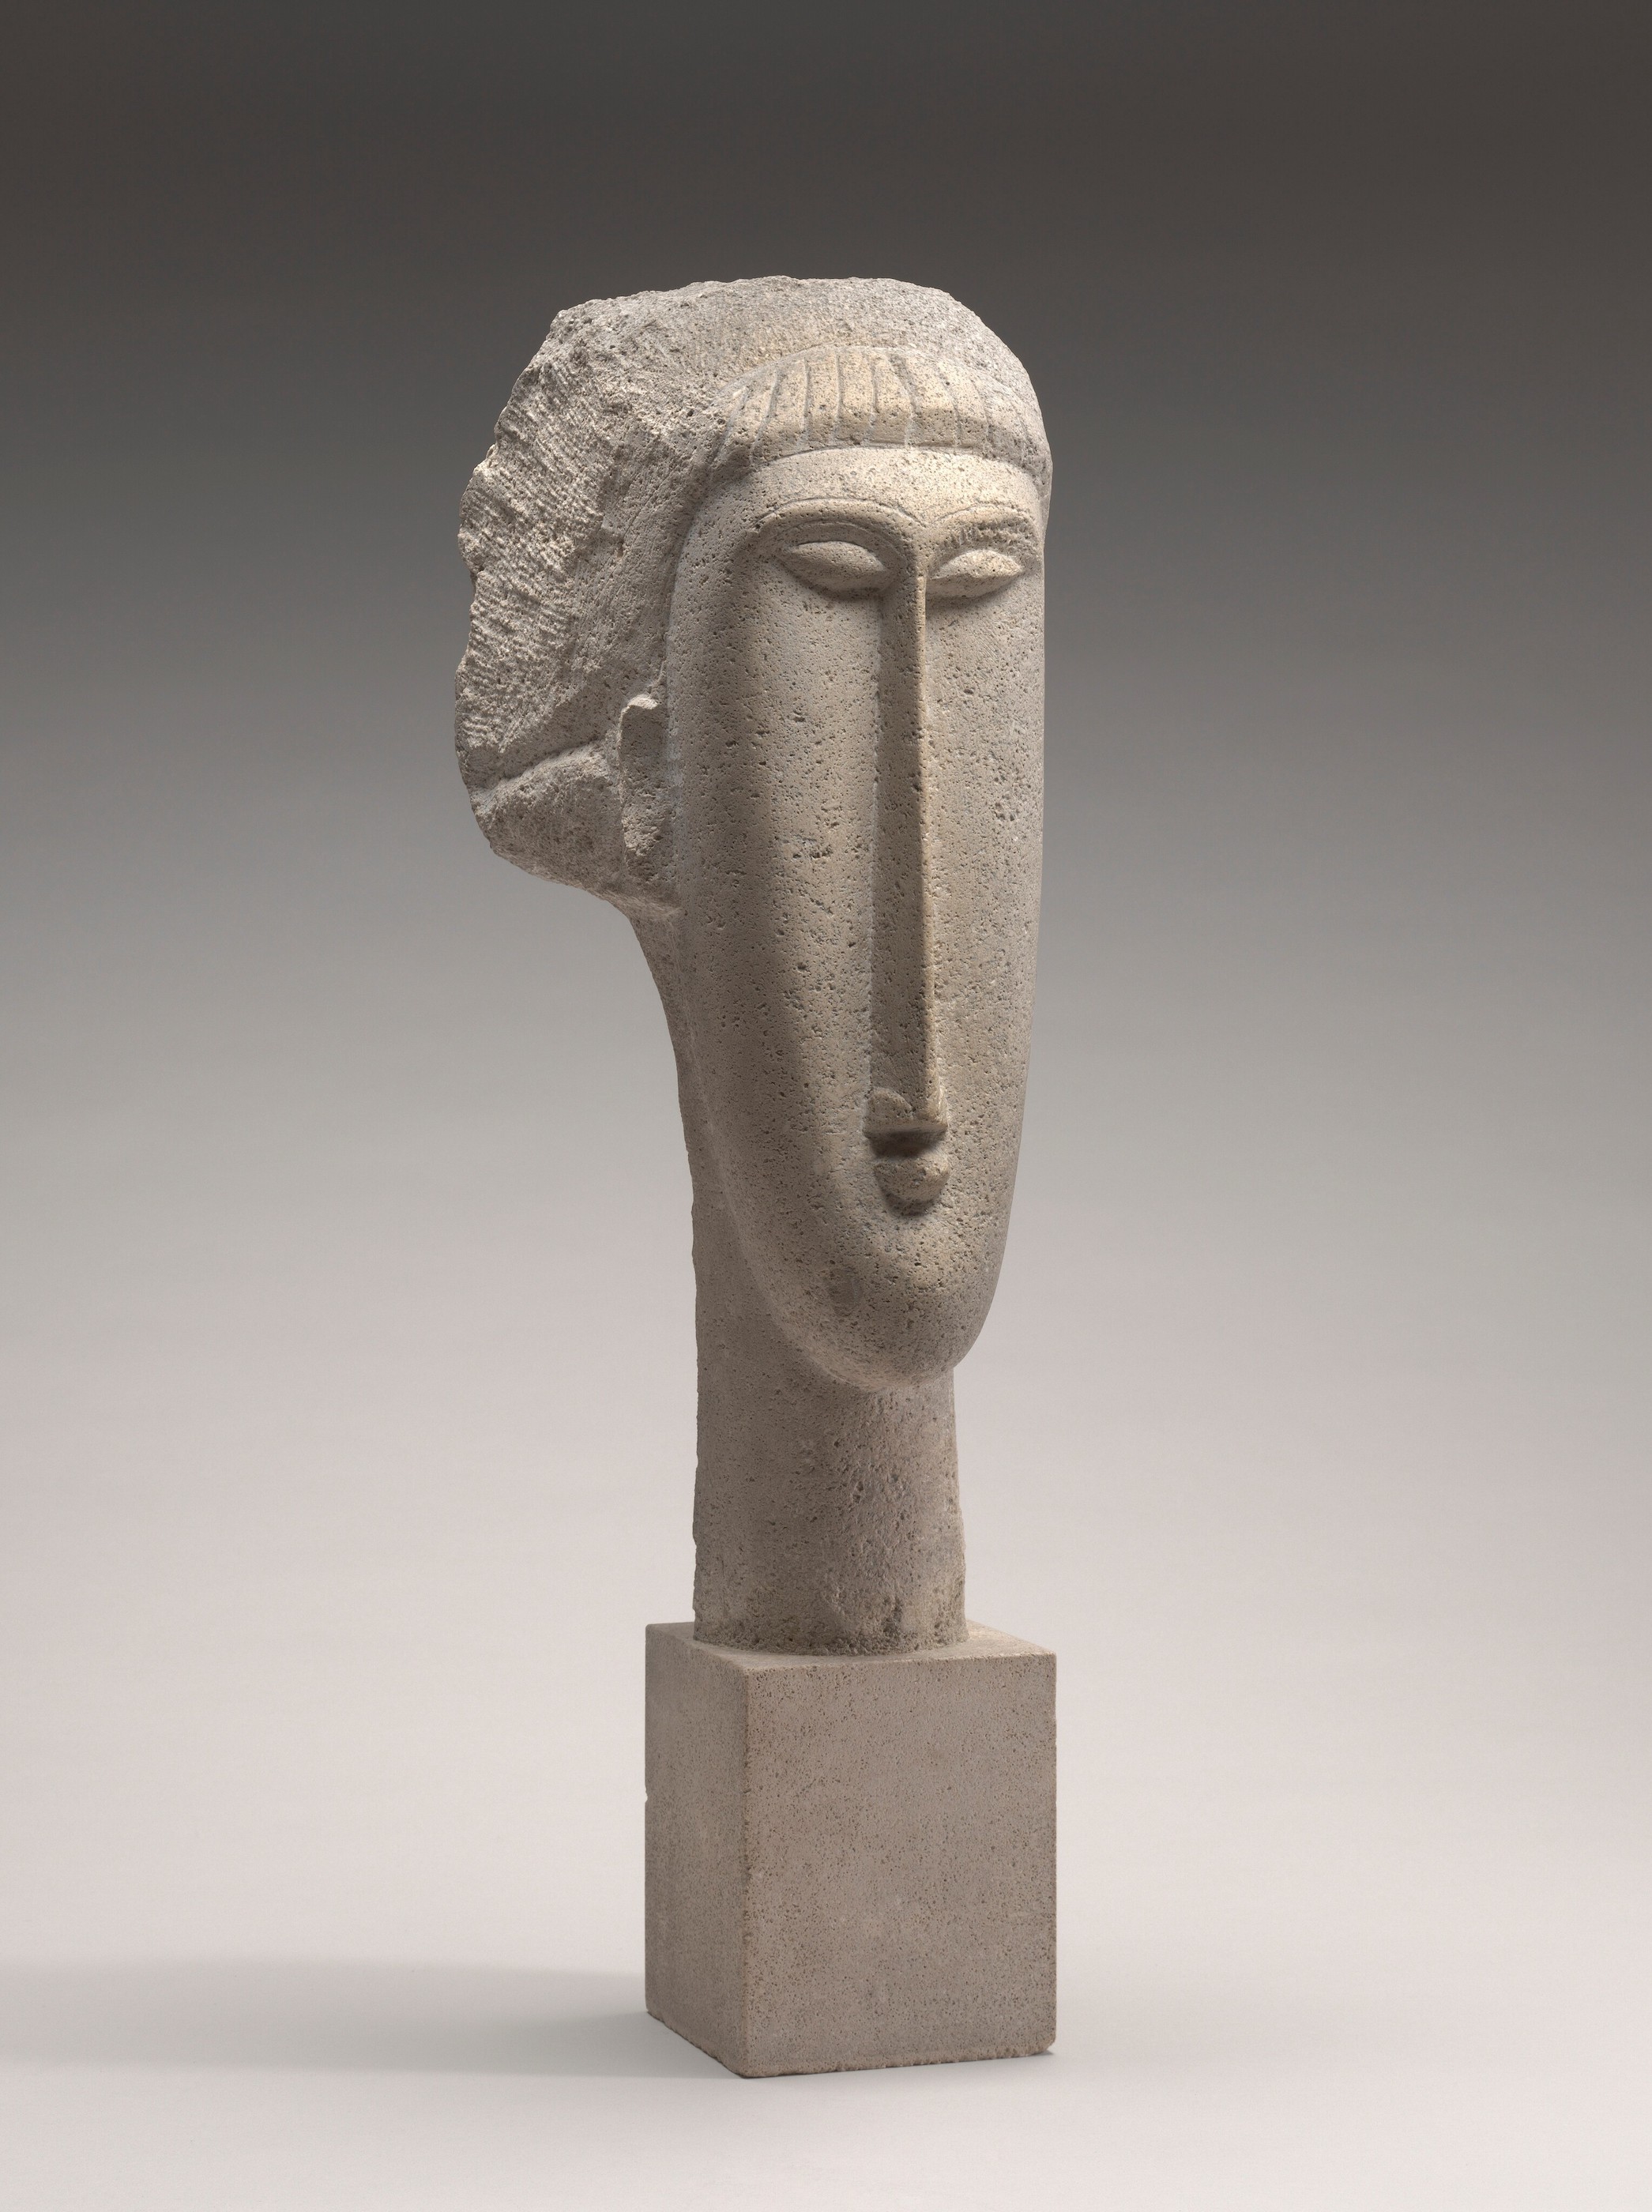 Head of a Woman by Amedeo Modigliani - c.1911-1912 - 65.2 × 16.51 × 24.8 cm National Gallery of Art